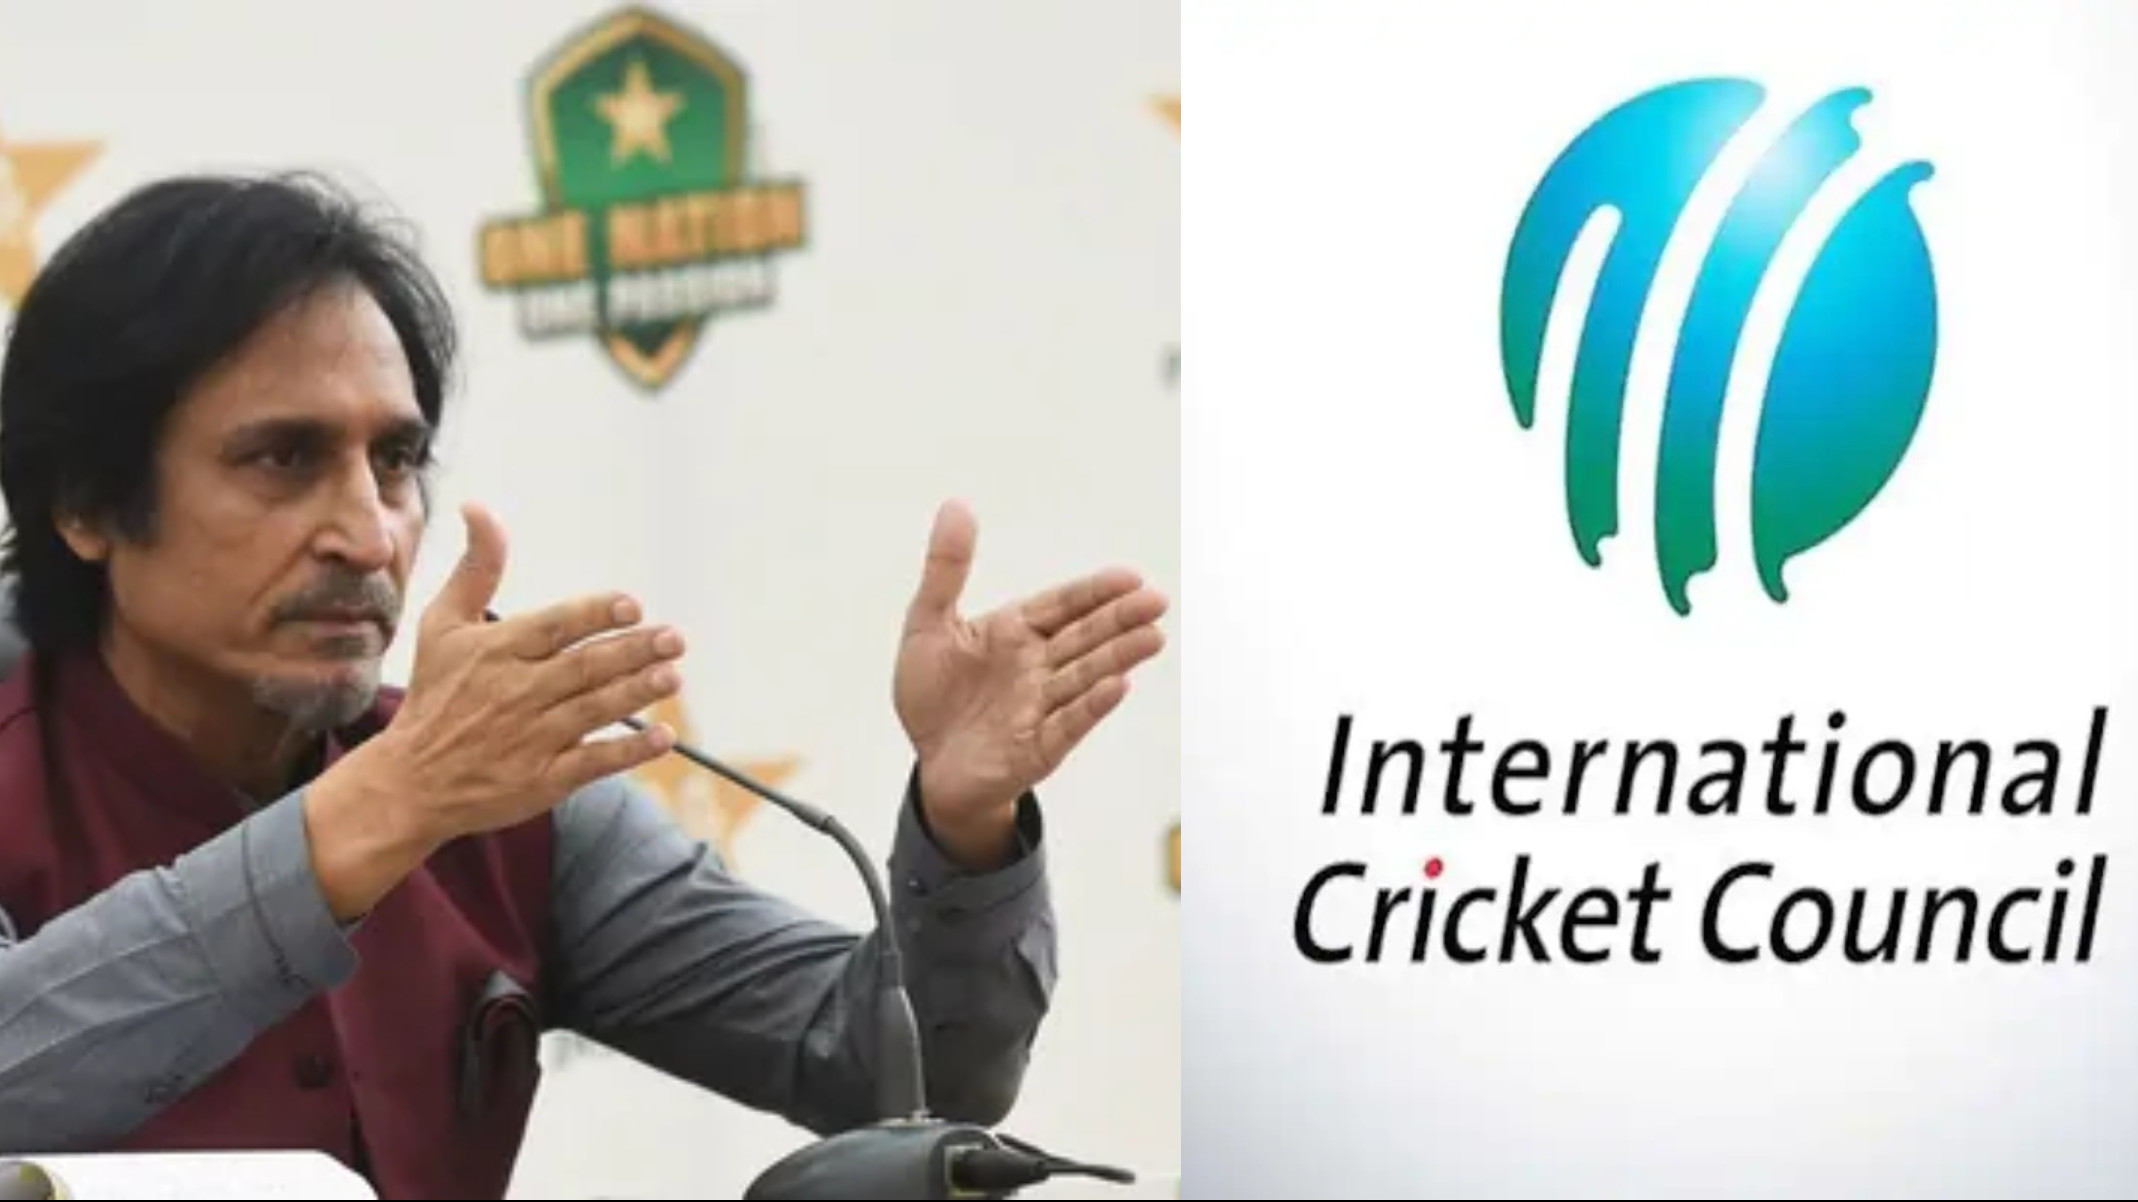 “India produces the entire wealth”- Ramiz Raja says ICC’s hands tied when it comes to resumption of India-Pakistan cricket ties